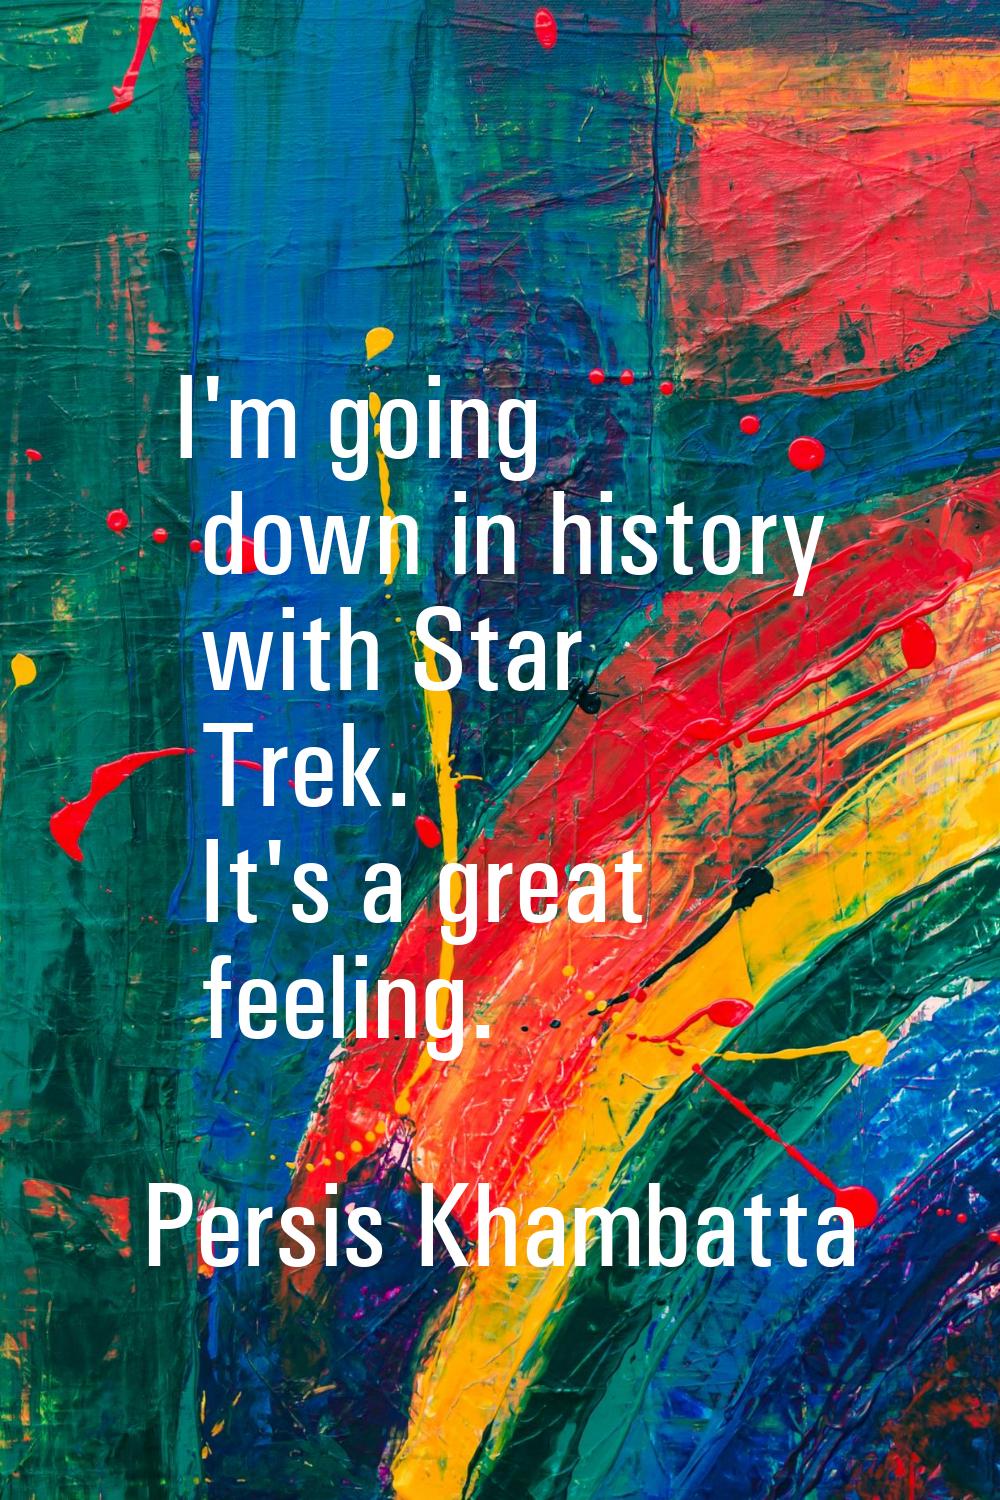 I'm going down in history with Star Trek. It's a great feeling.